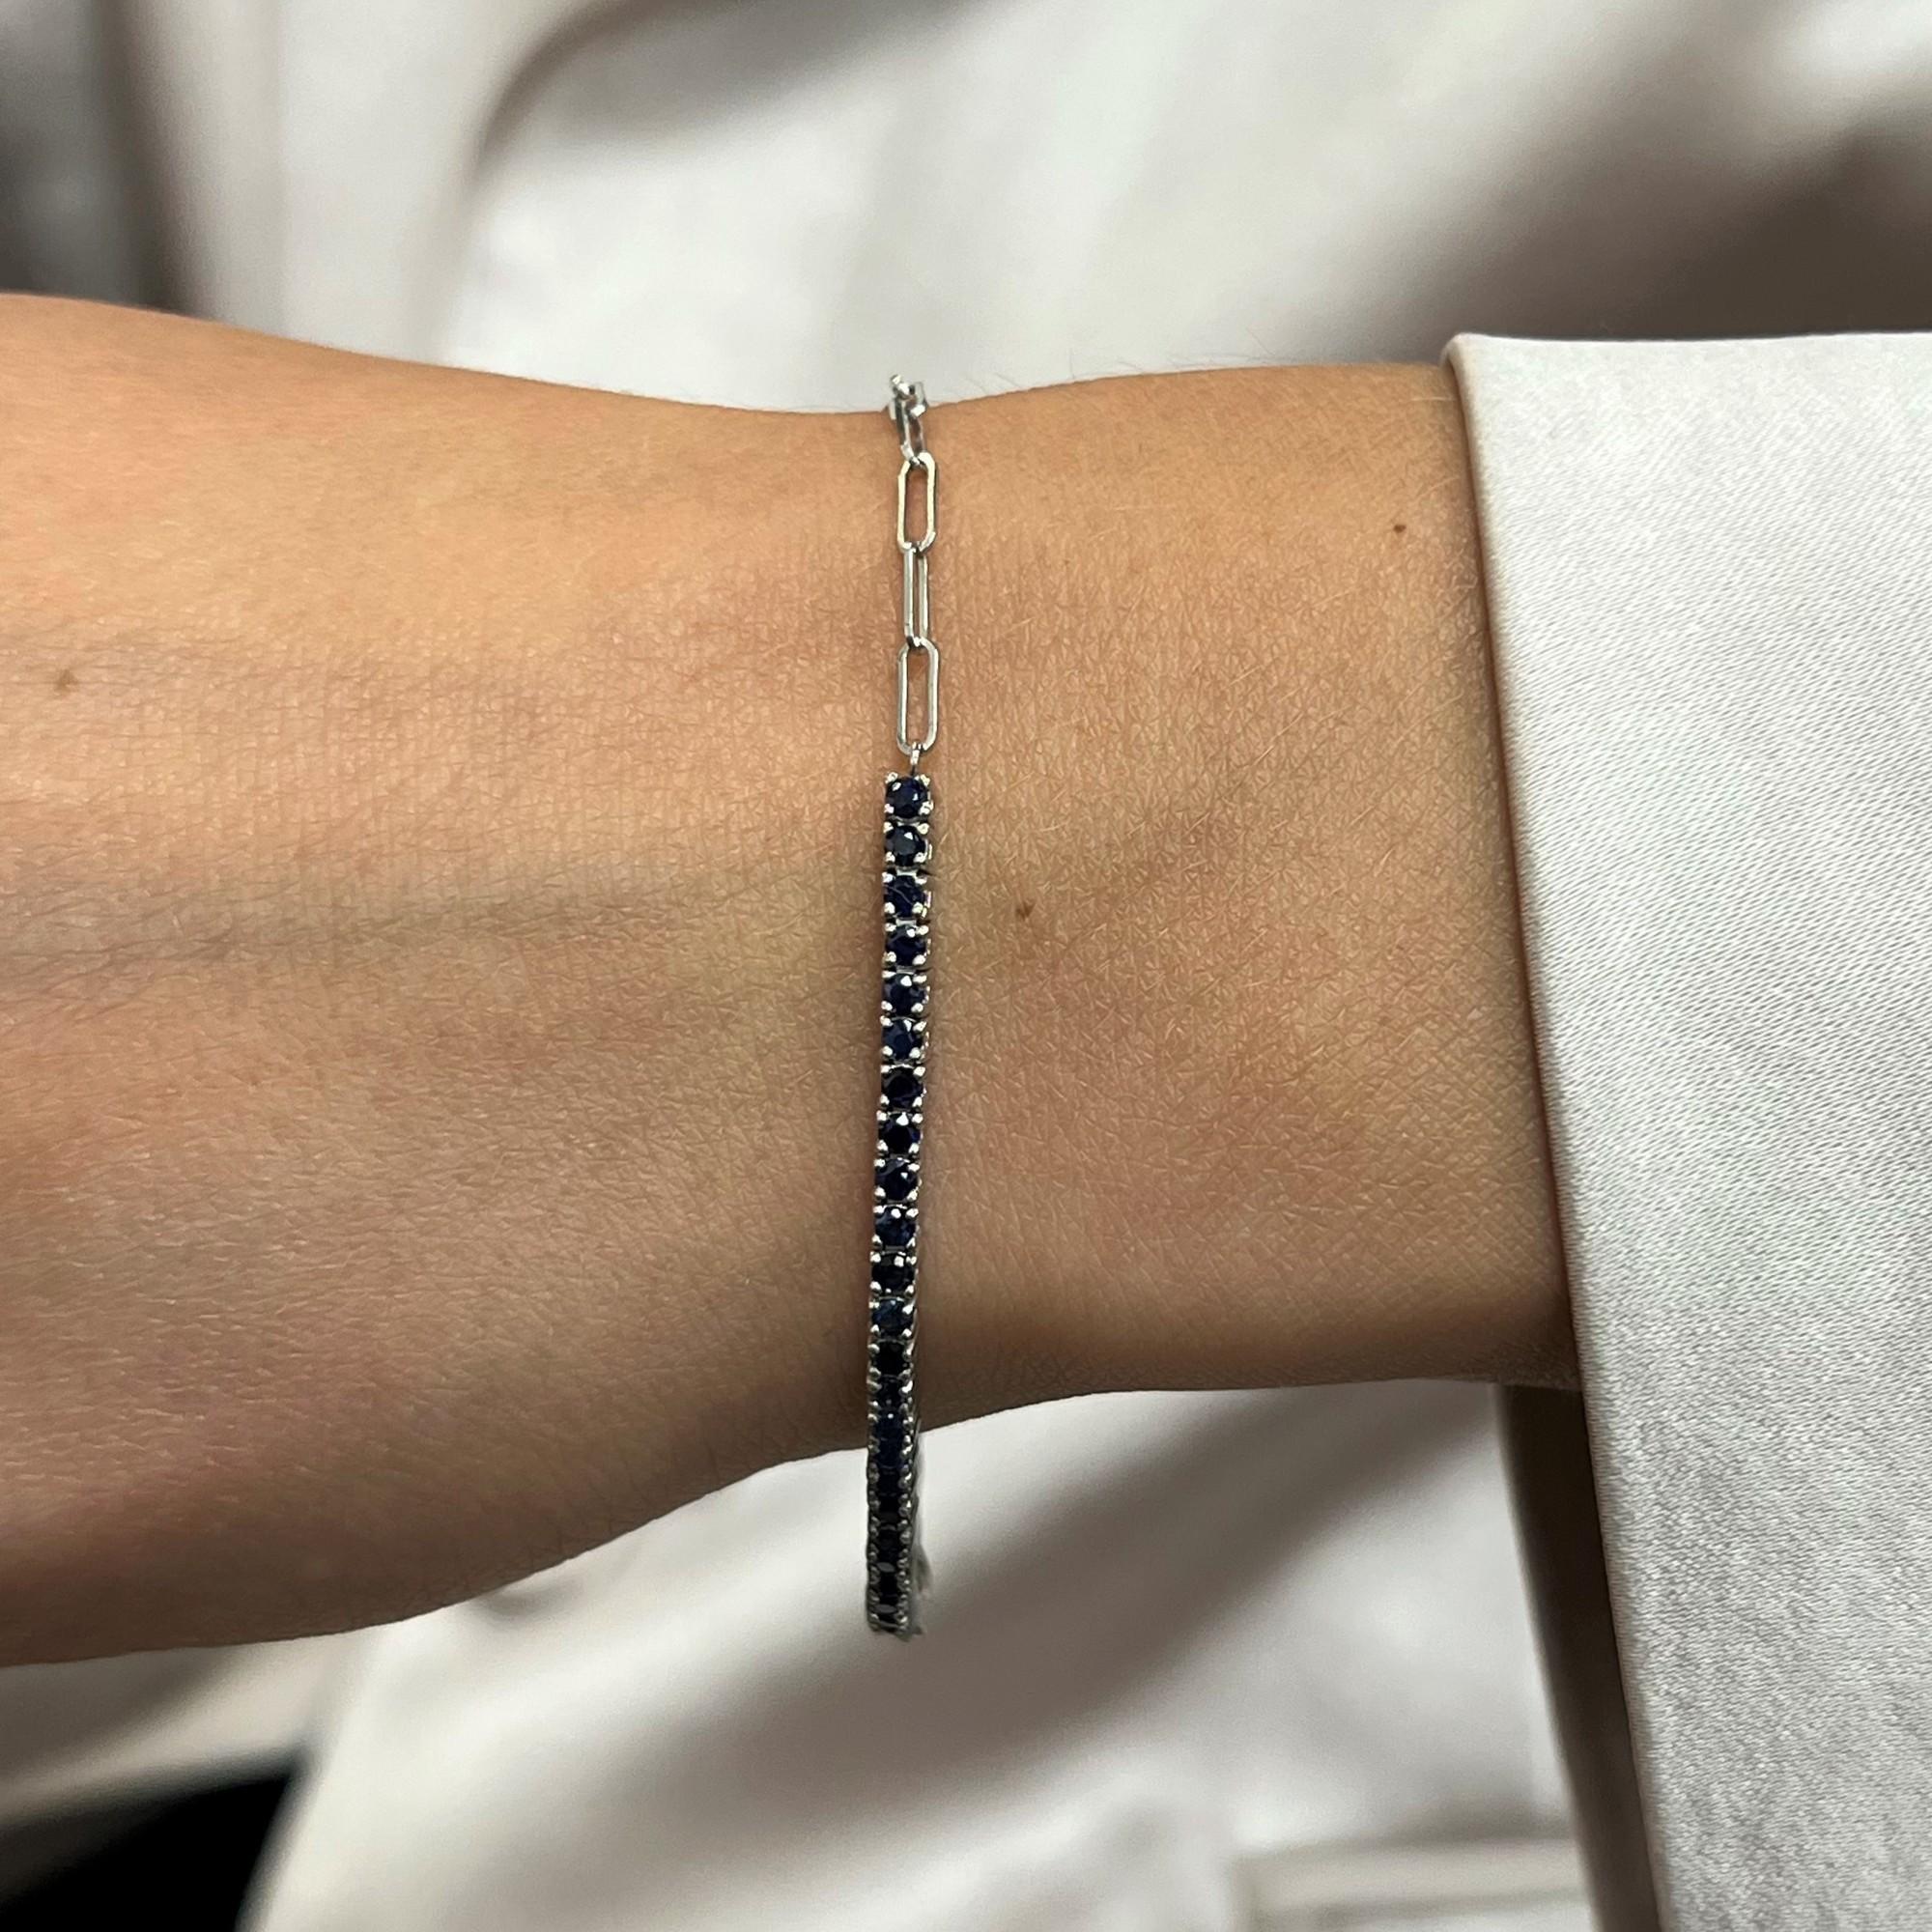 Rachel Koen 1.16Cttw Blue Sapphire Tennis Bracelet 14K White Gold 6.5 Inches In New Condition For Sale In New York, NY